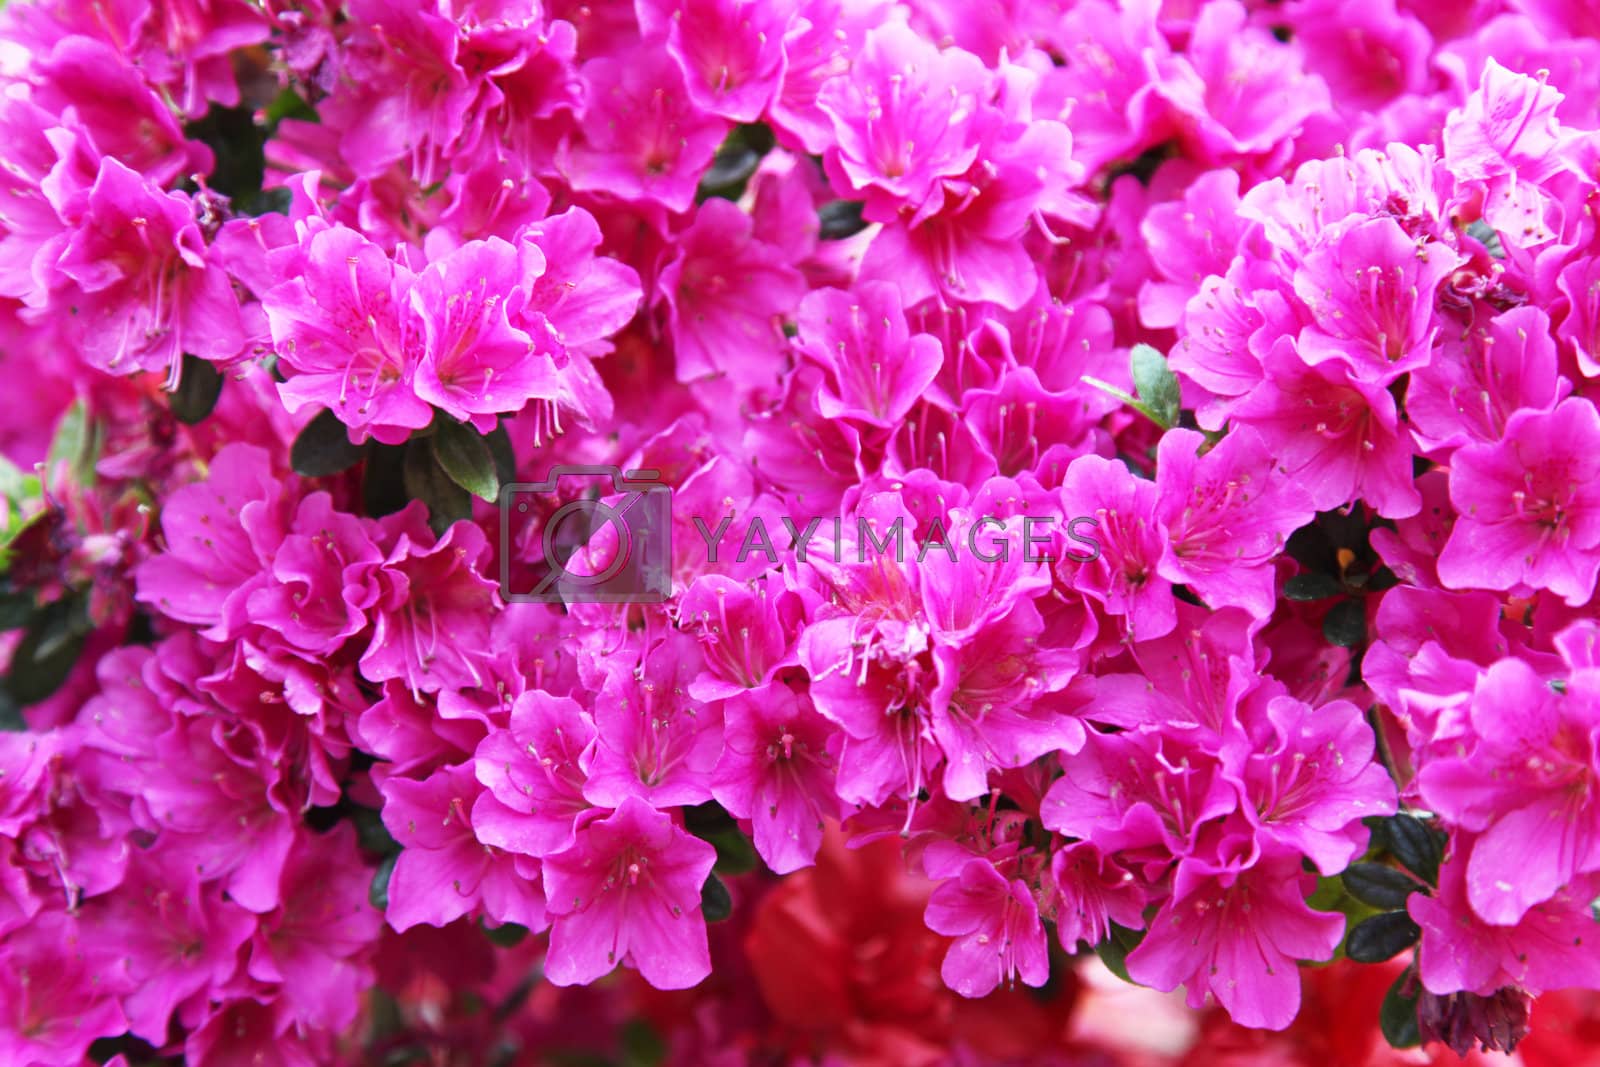 Royalty free image of Red and pink rhododendron by Farina6000